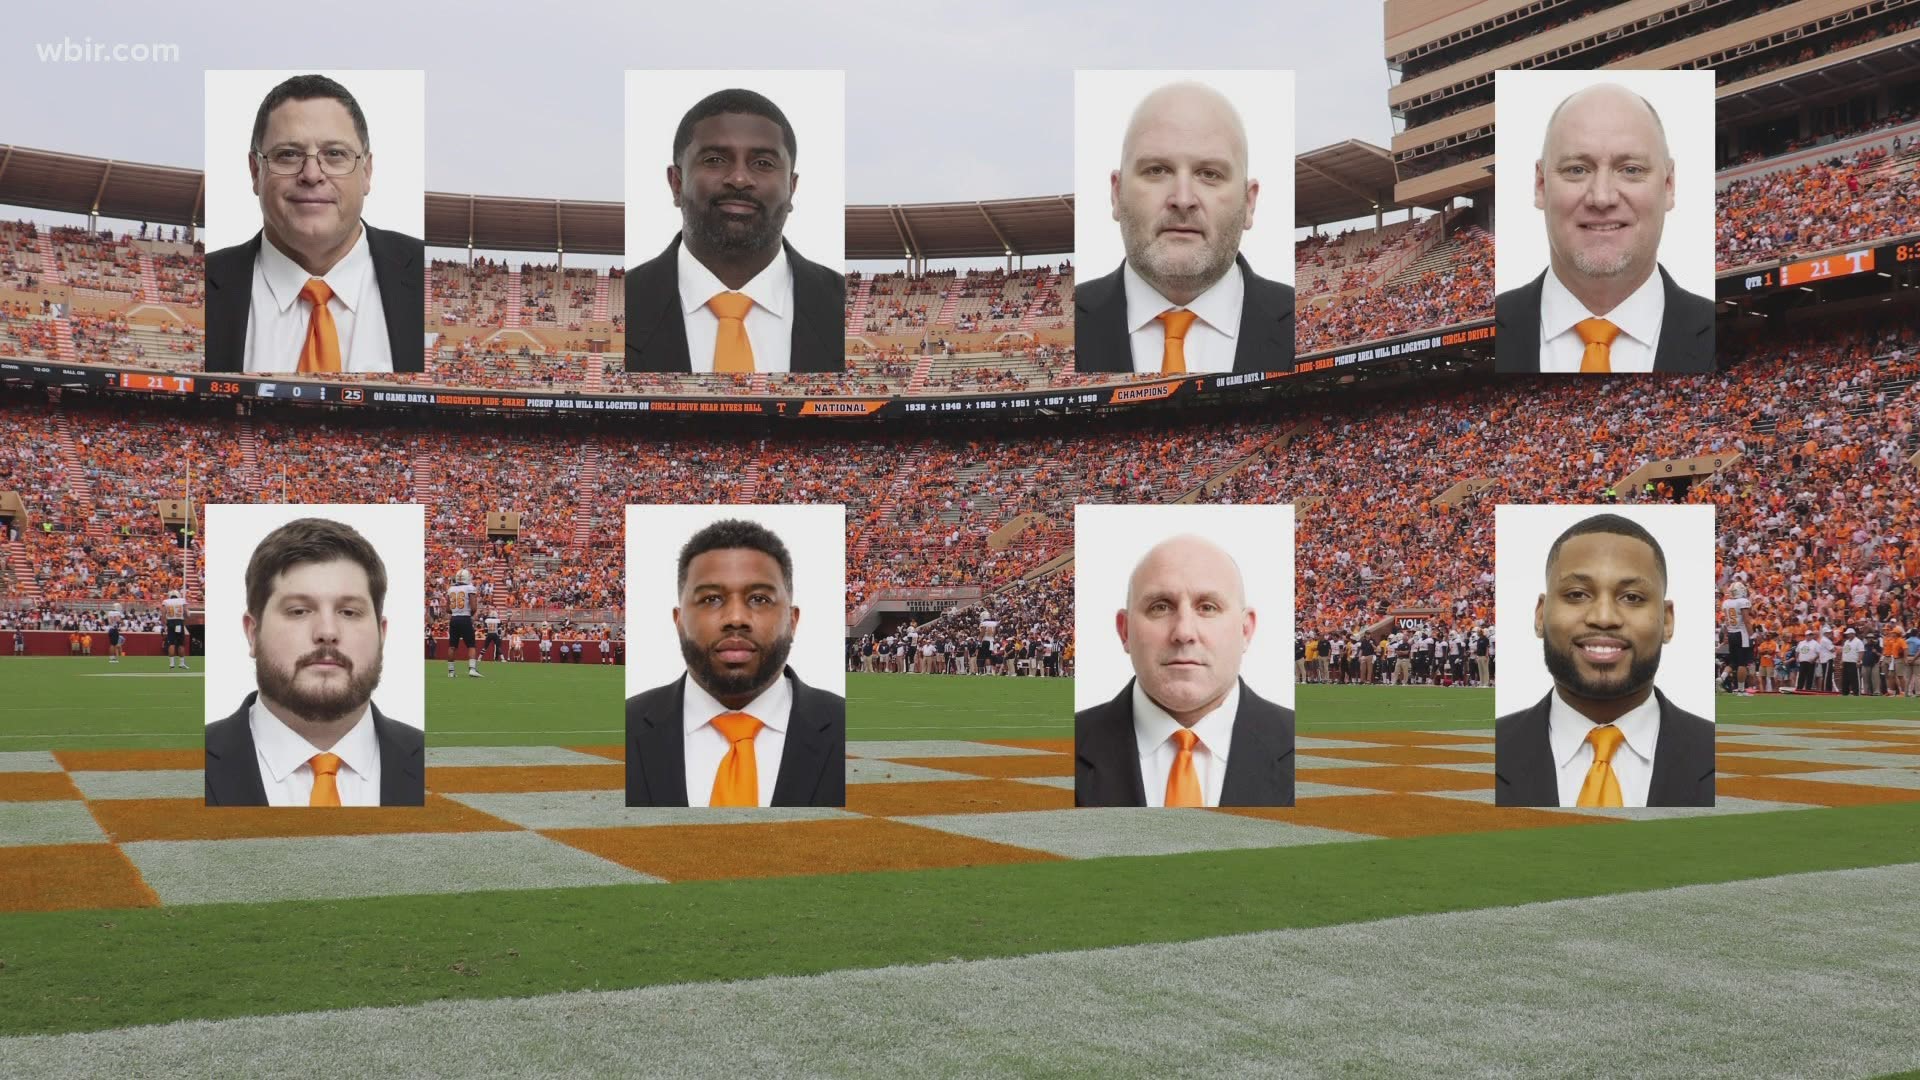 Eight UT football coaches are rejecting proposed pay cuts driven by budget shortfalls.